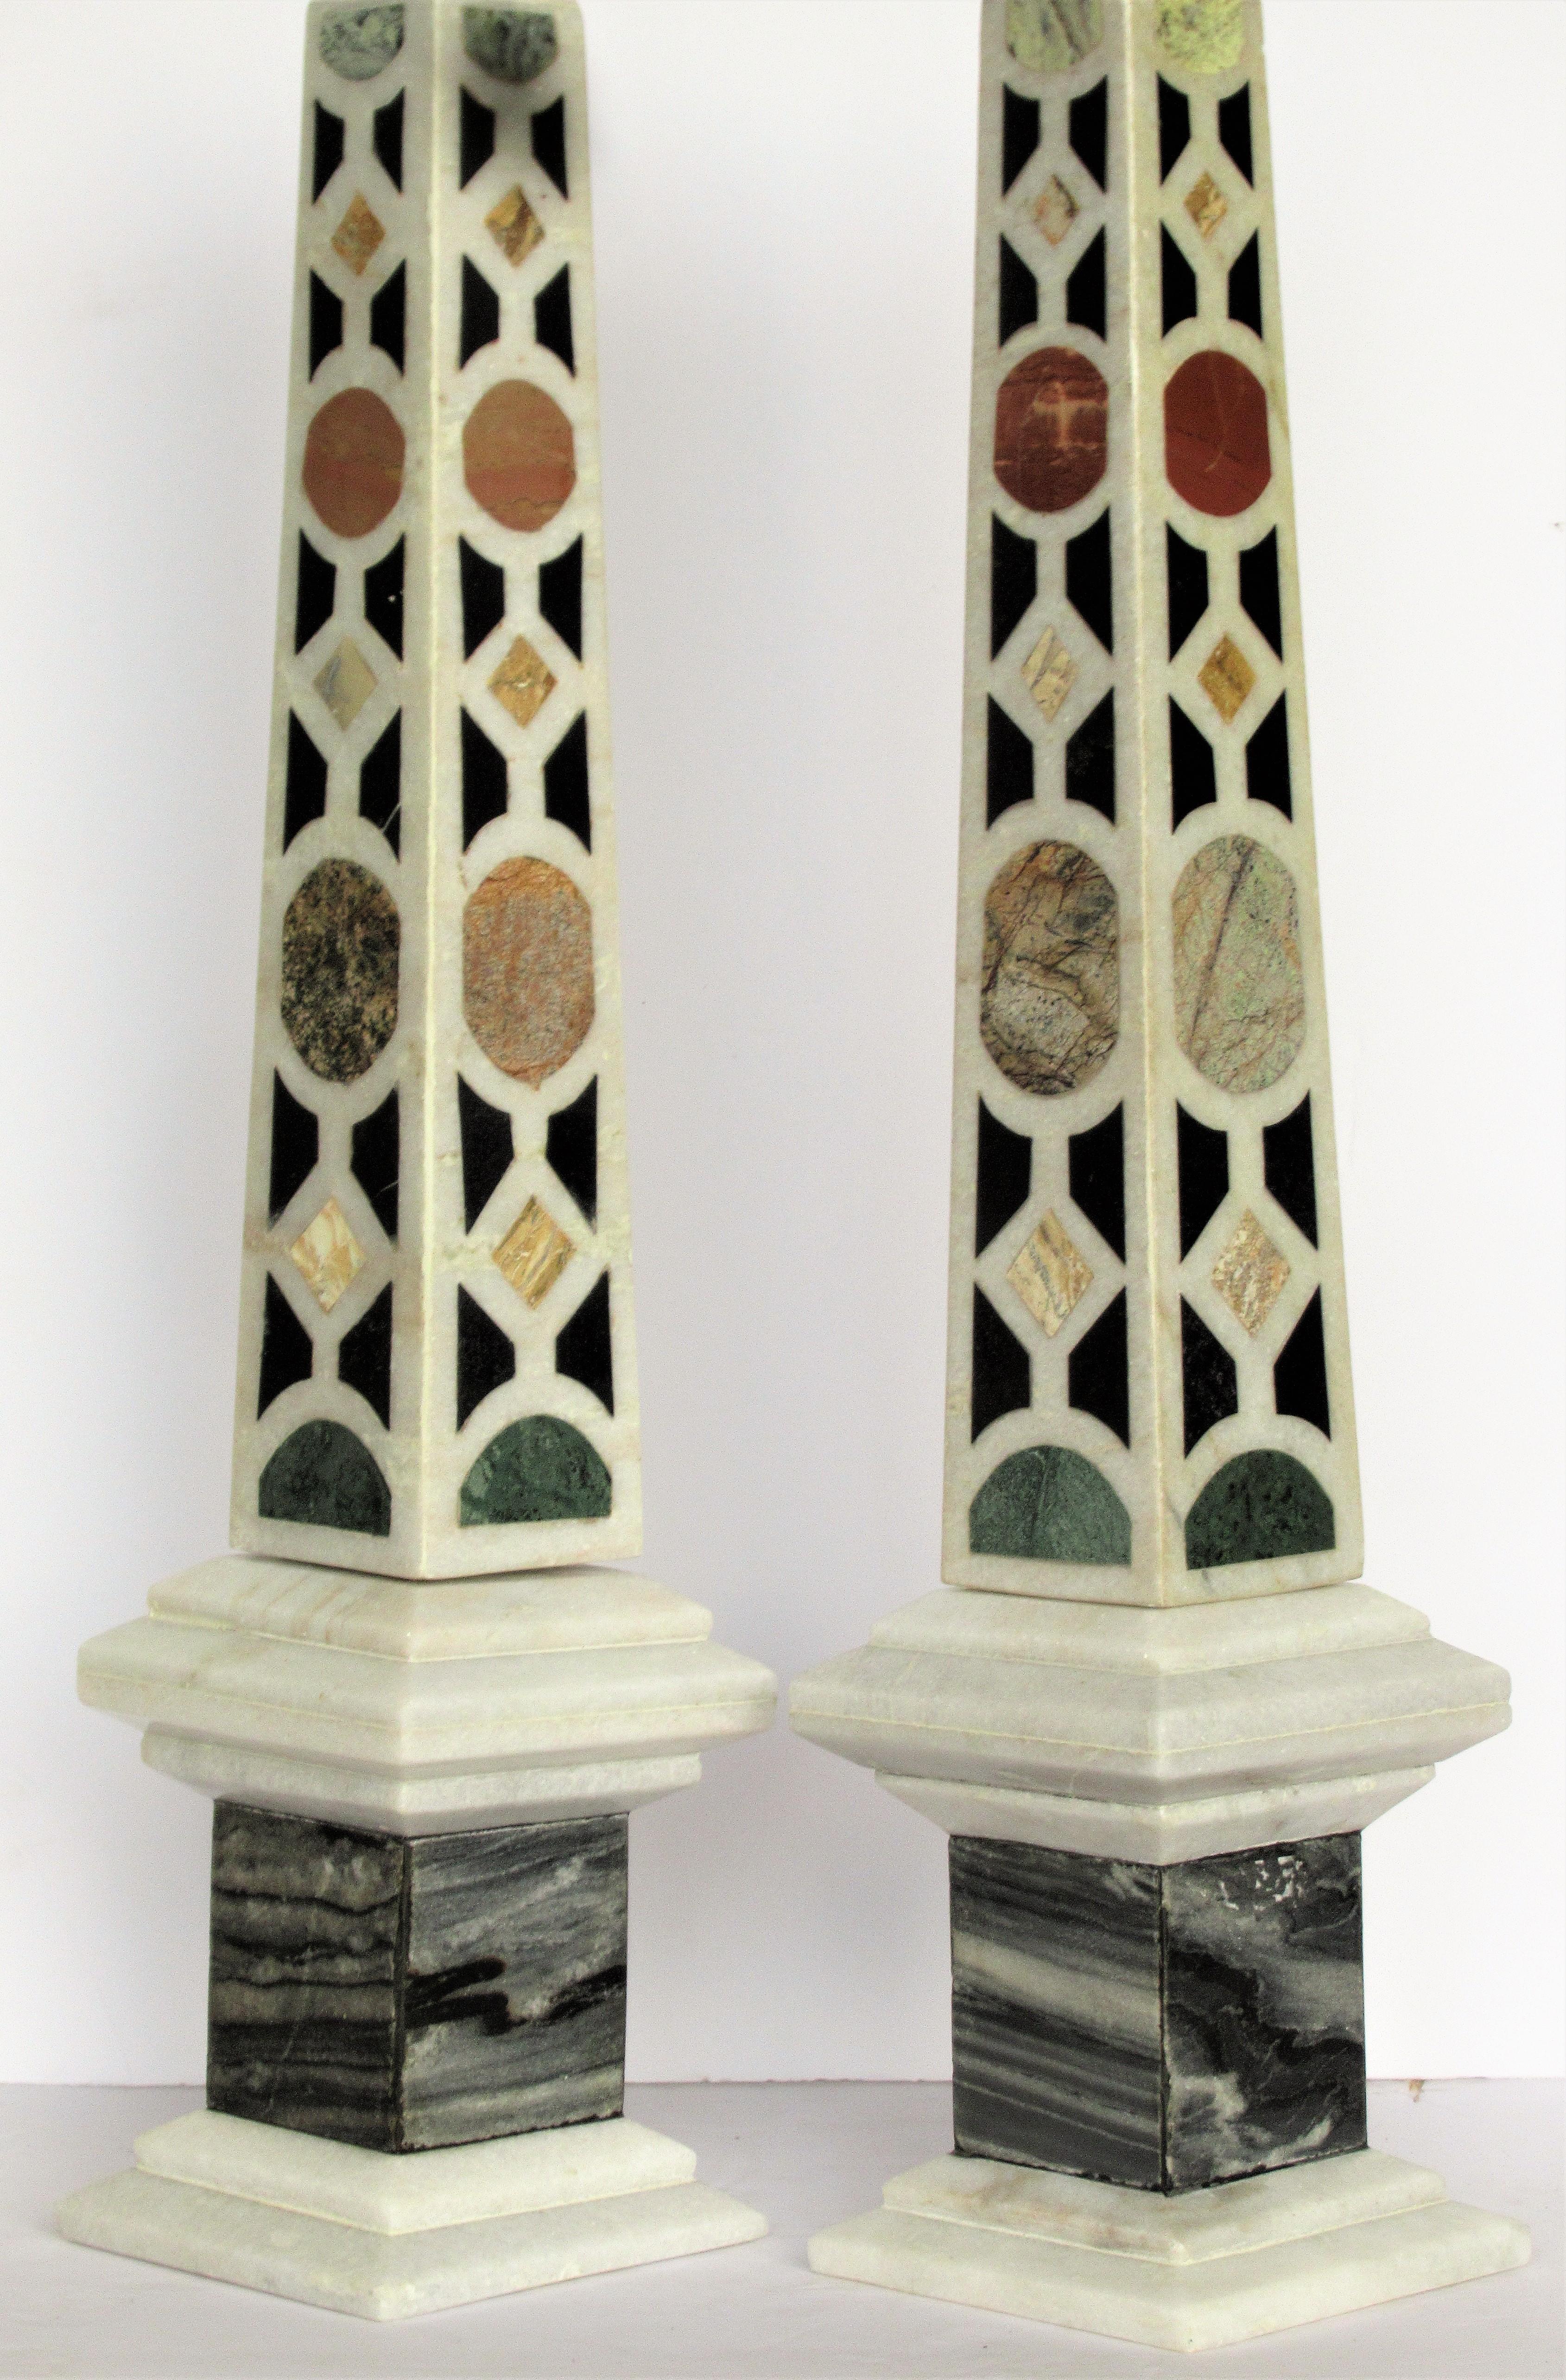 A beautiful pair of Italian specimen marble obelisks with gray and white bases and inlaid varieties of marble stone. Look at all pictures and read condition report in comment.